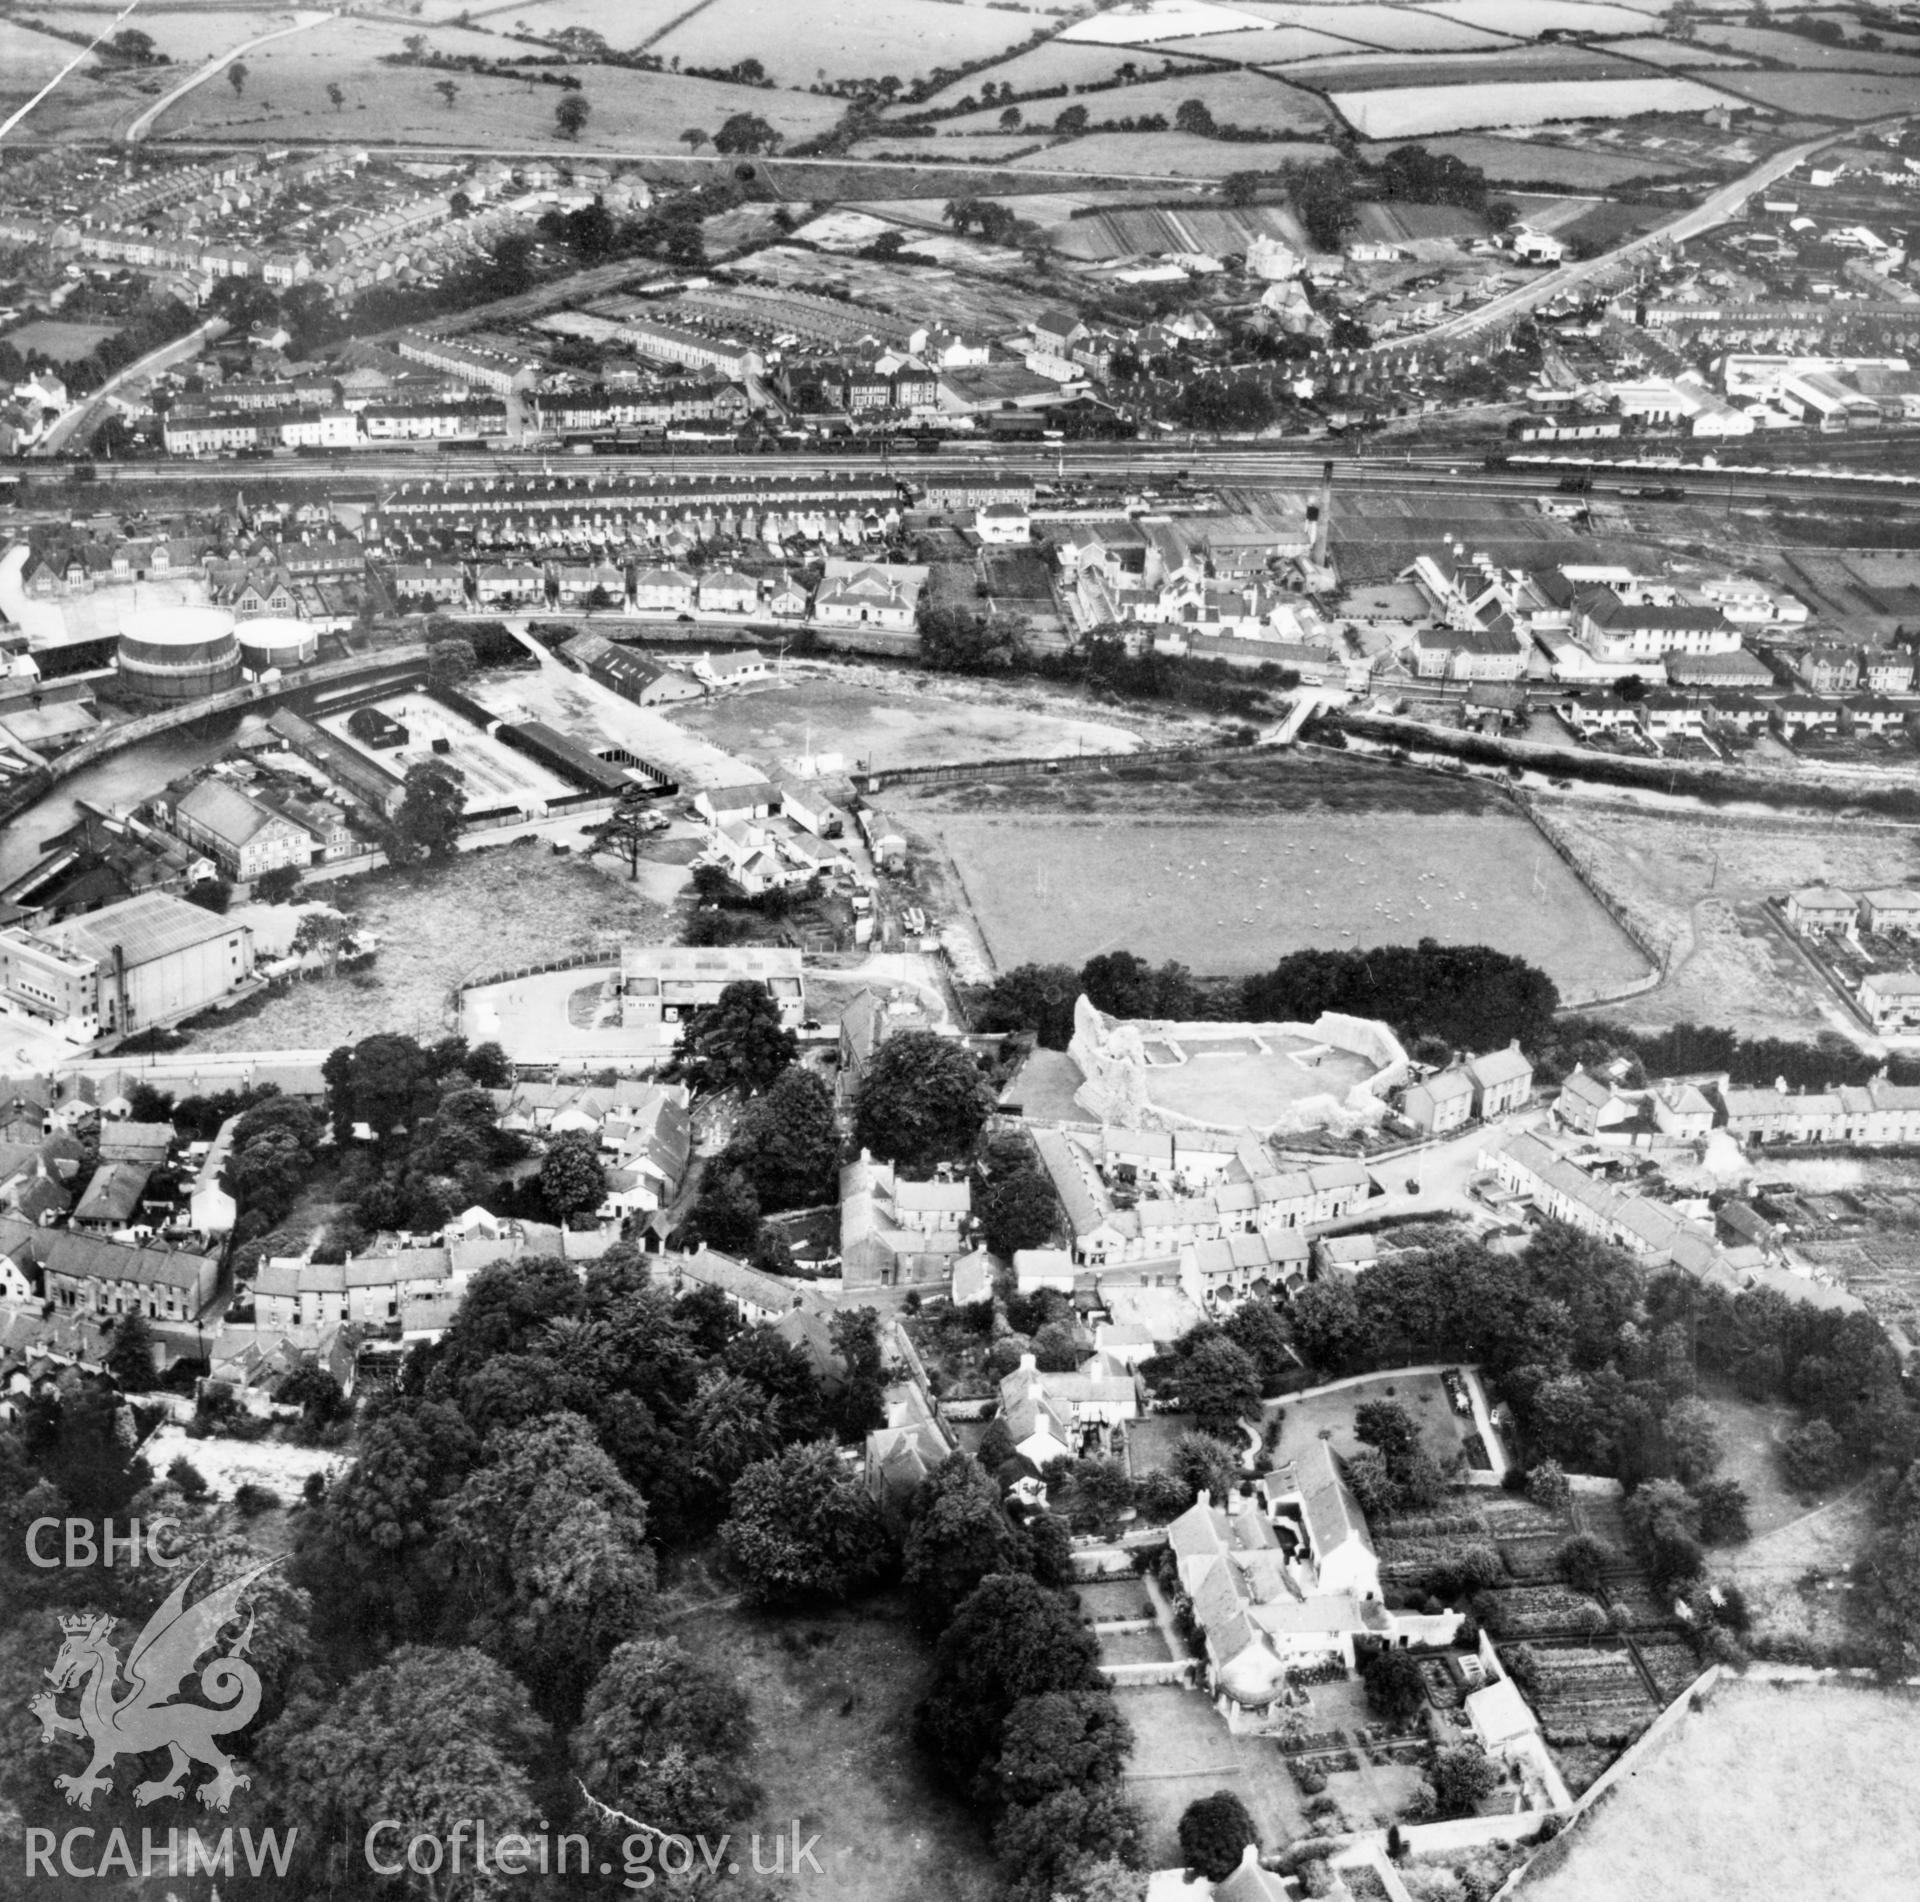 View of Bridgend showing castle, cinema, brewery field athletics ground and cattle market (reversed). Oblique aerial photograph, 5?" cut roll film.